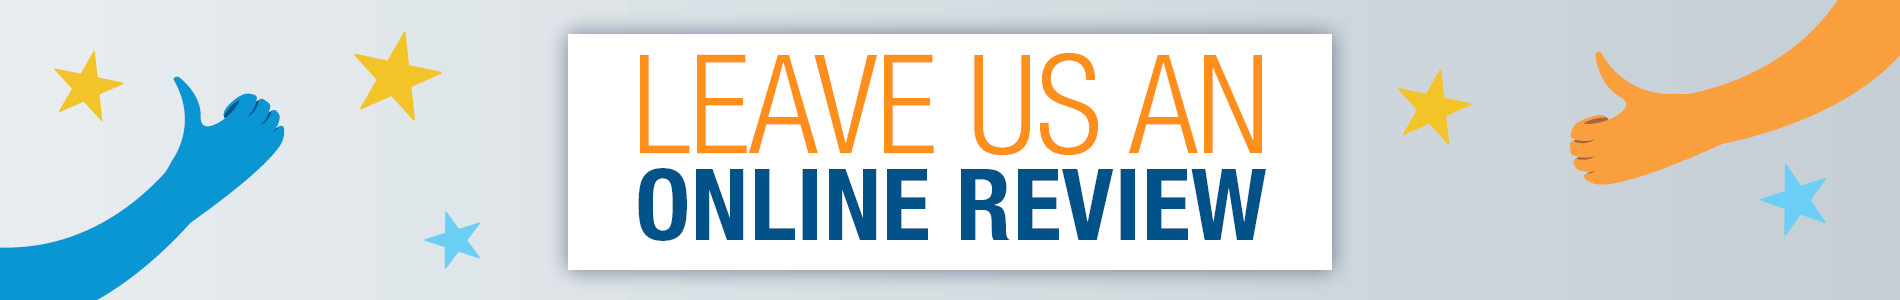 Leave us an online review!